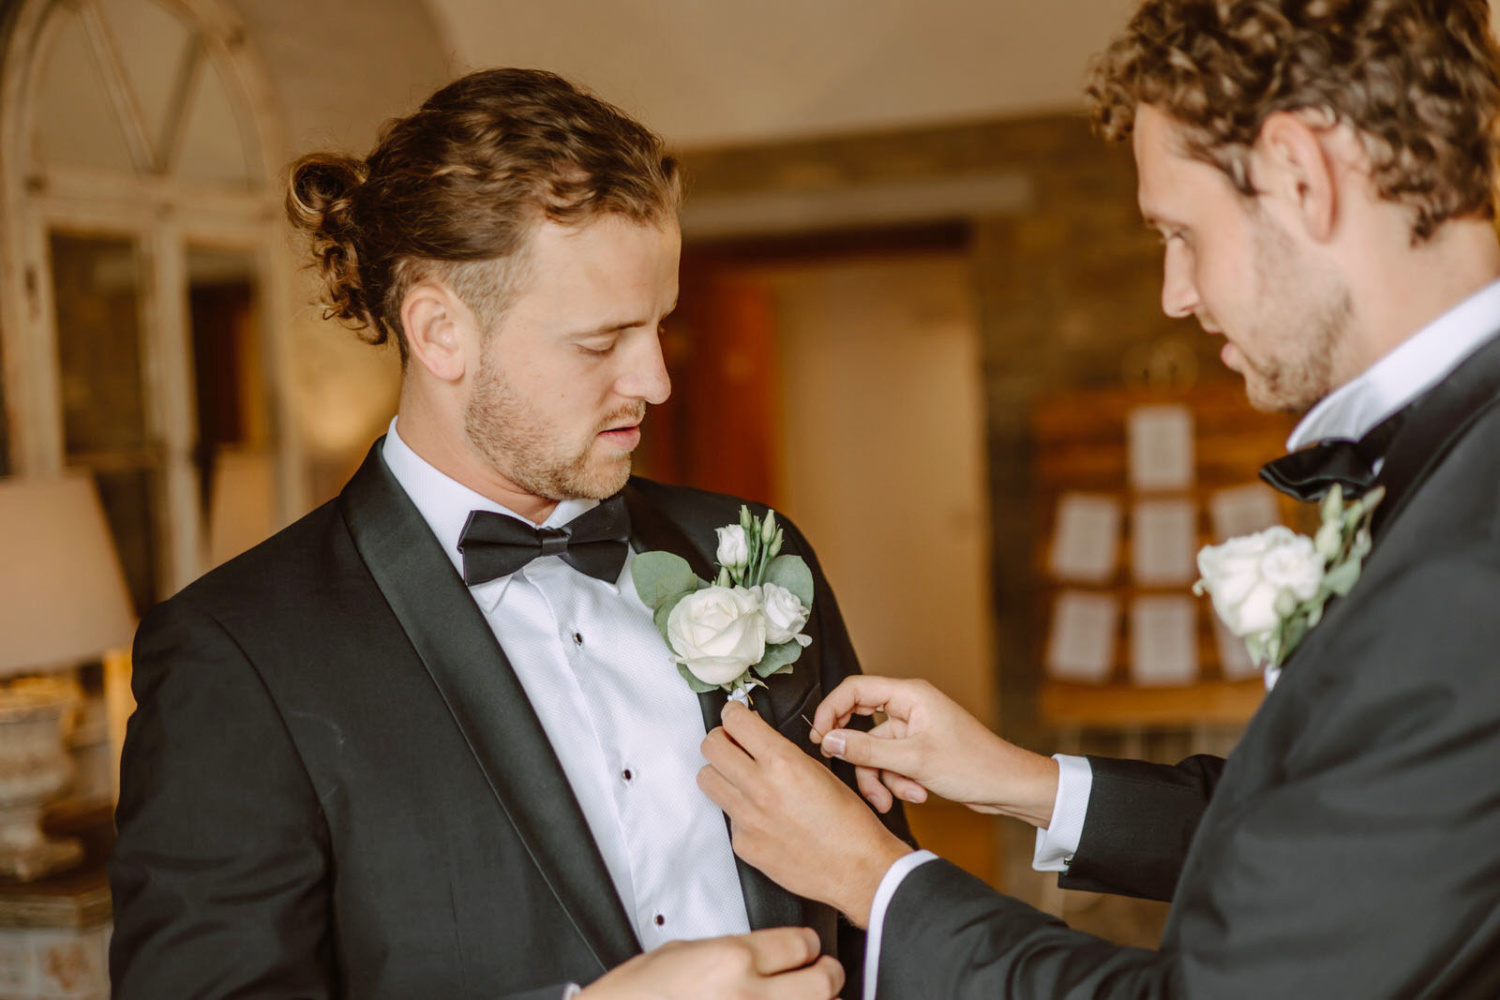 The best man place a buttonhole for the groom.